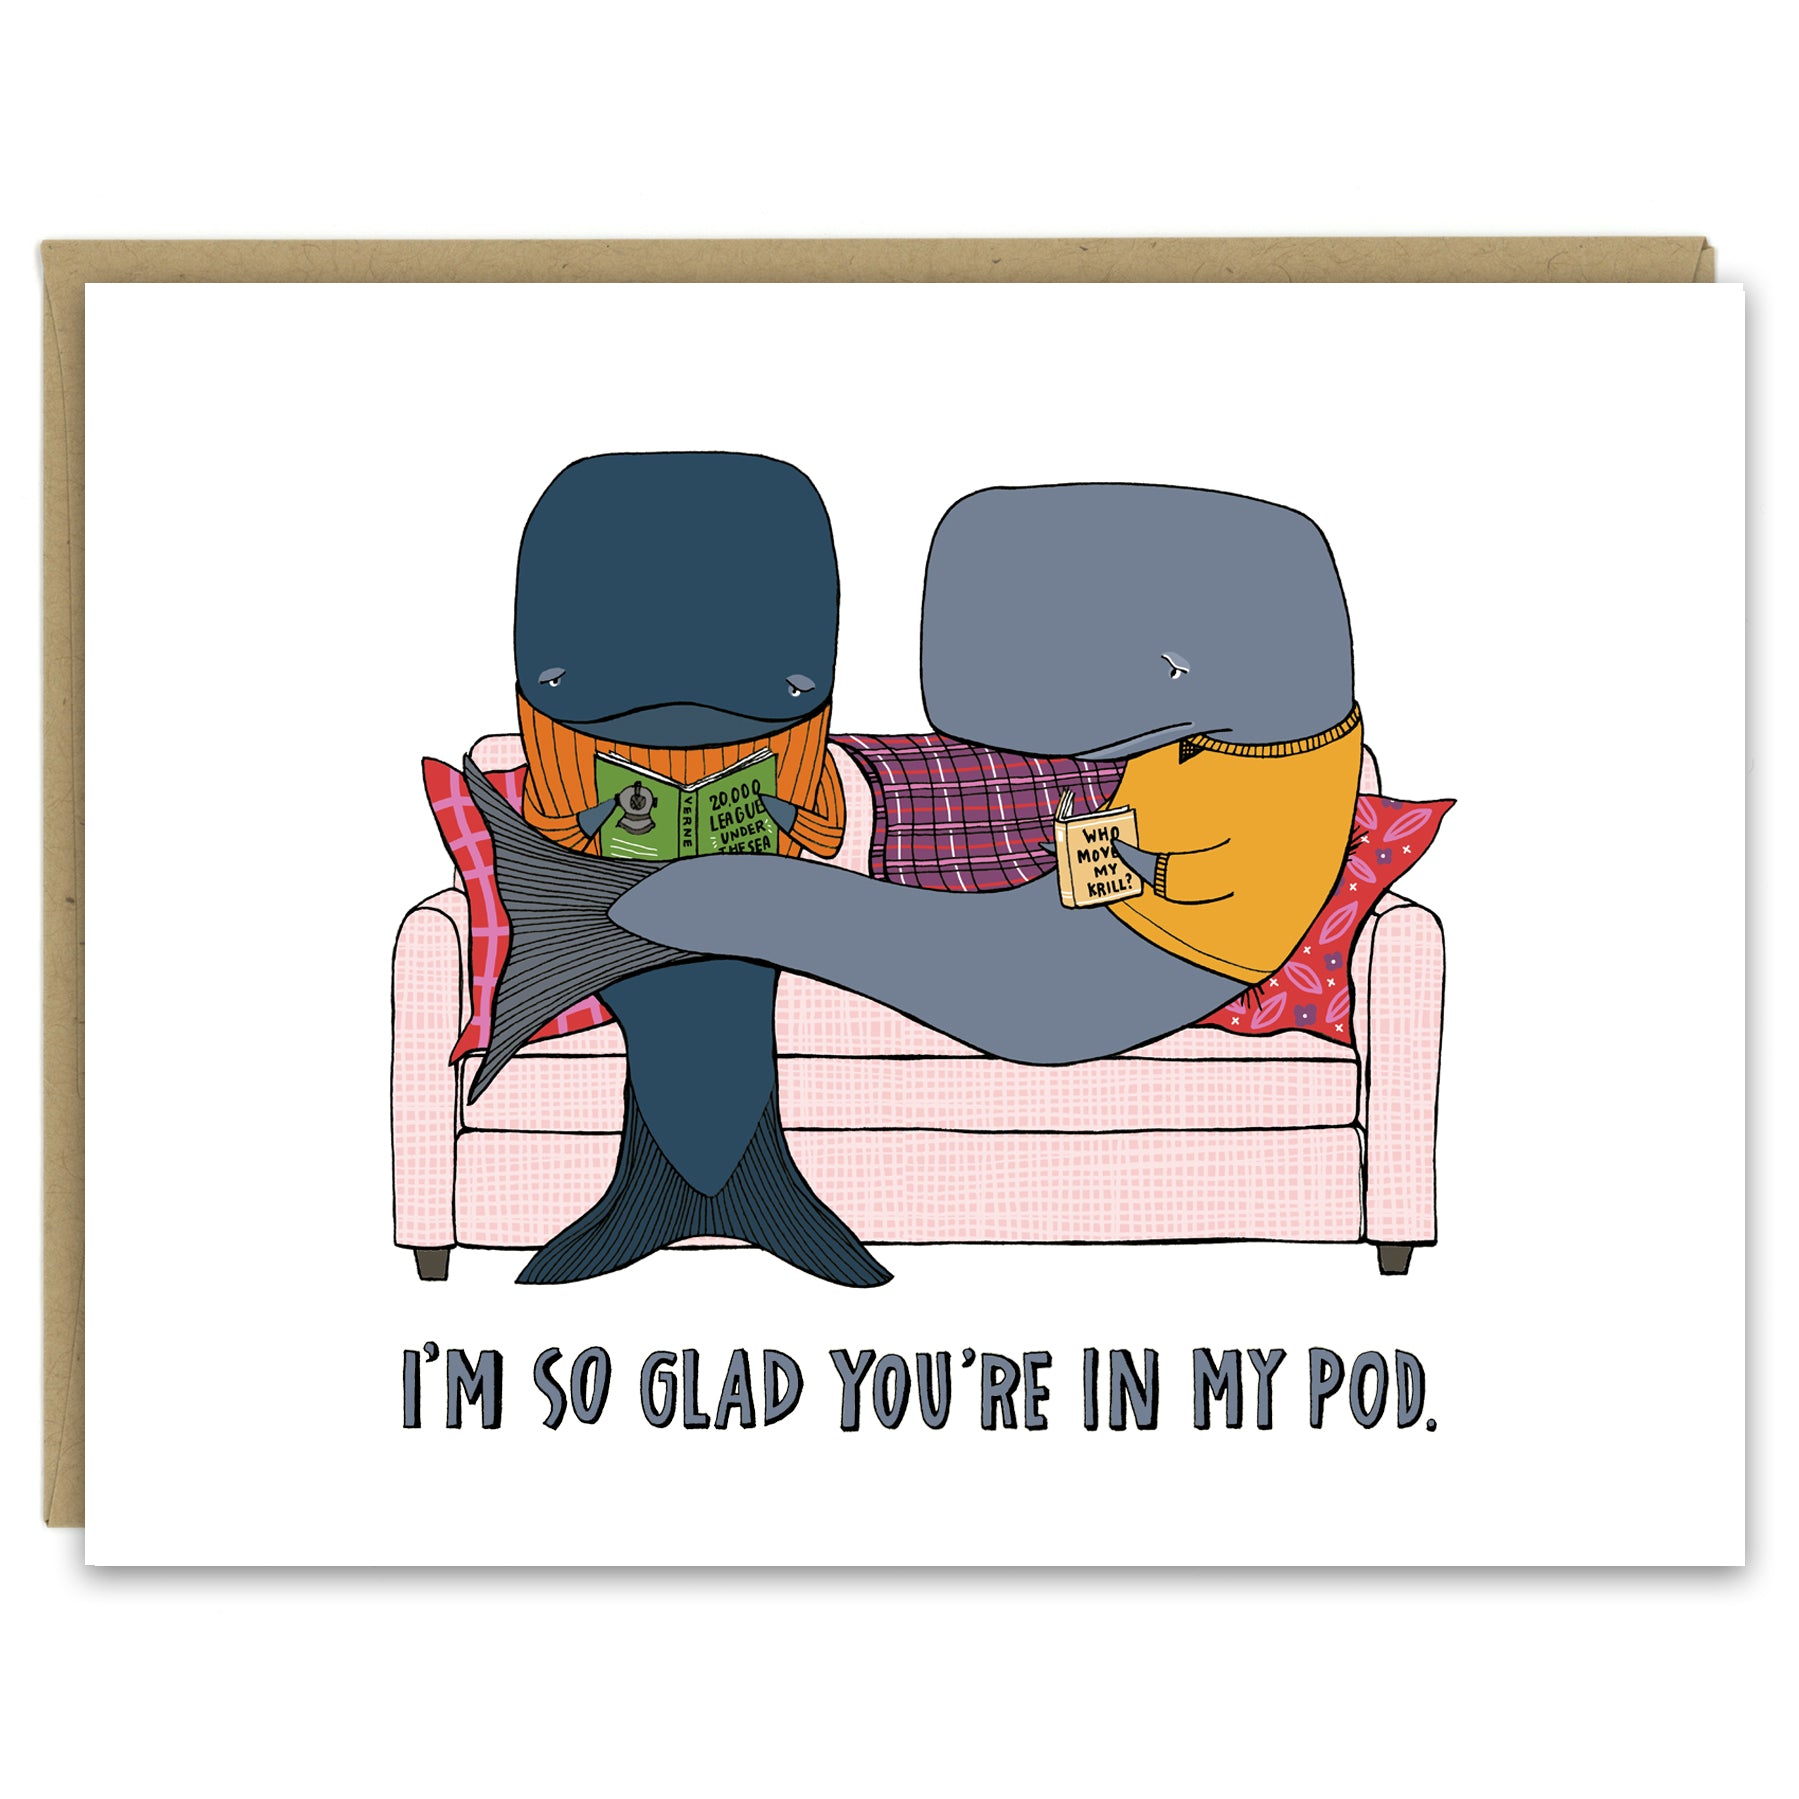 Whale, I'm So Glad You're in My Pod Greeting Card